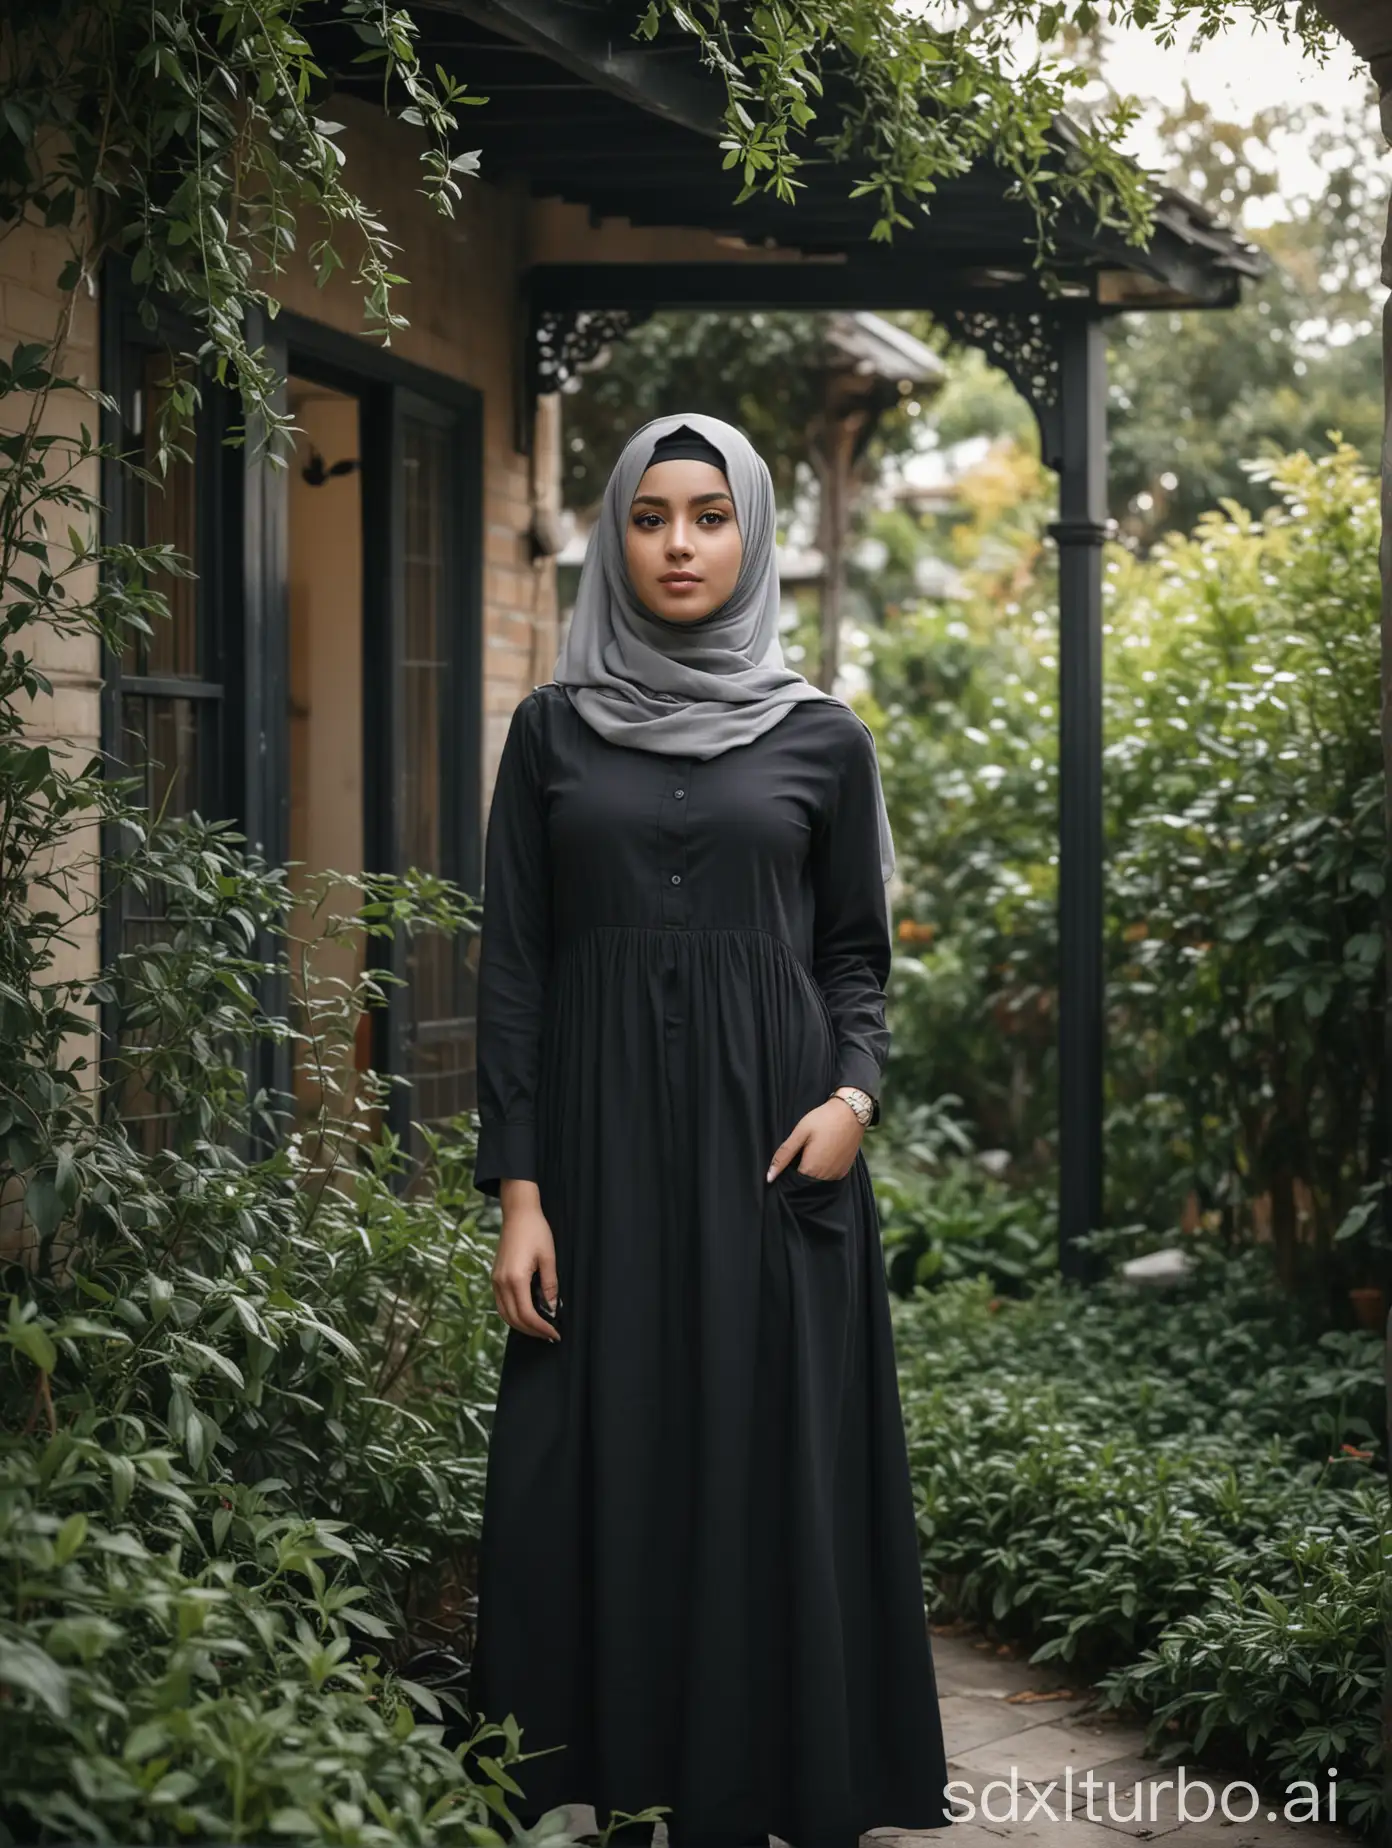 Young-Muslim-Woman-in-Black-Hijab-Standing-in-Garden-House